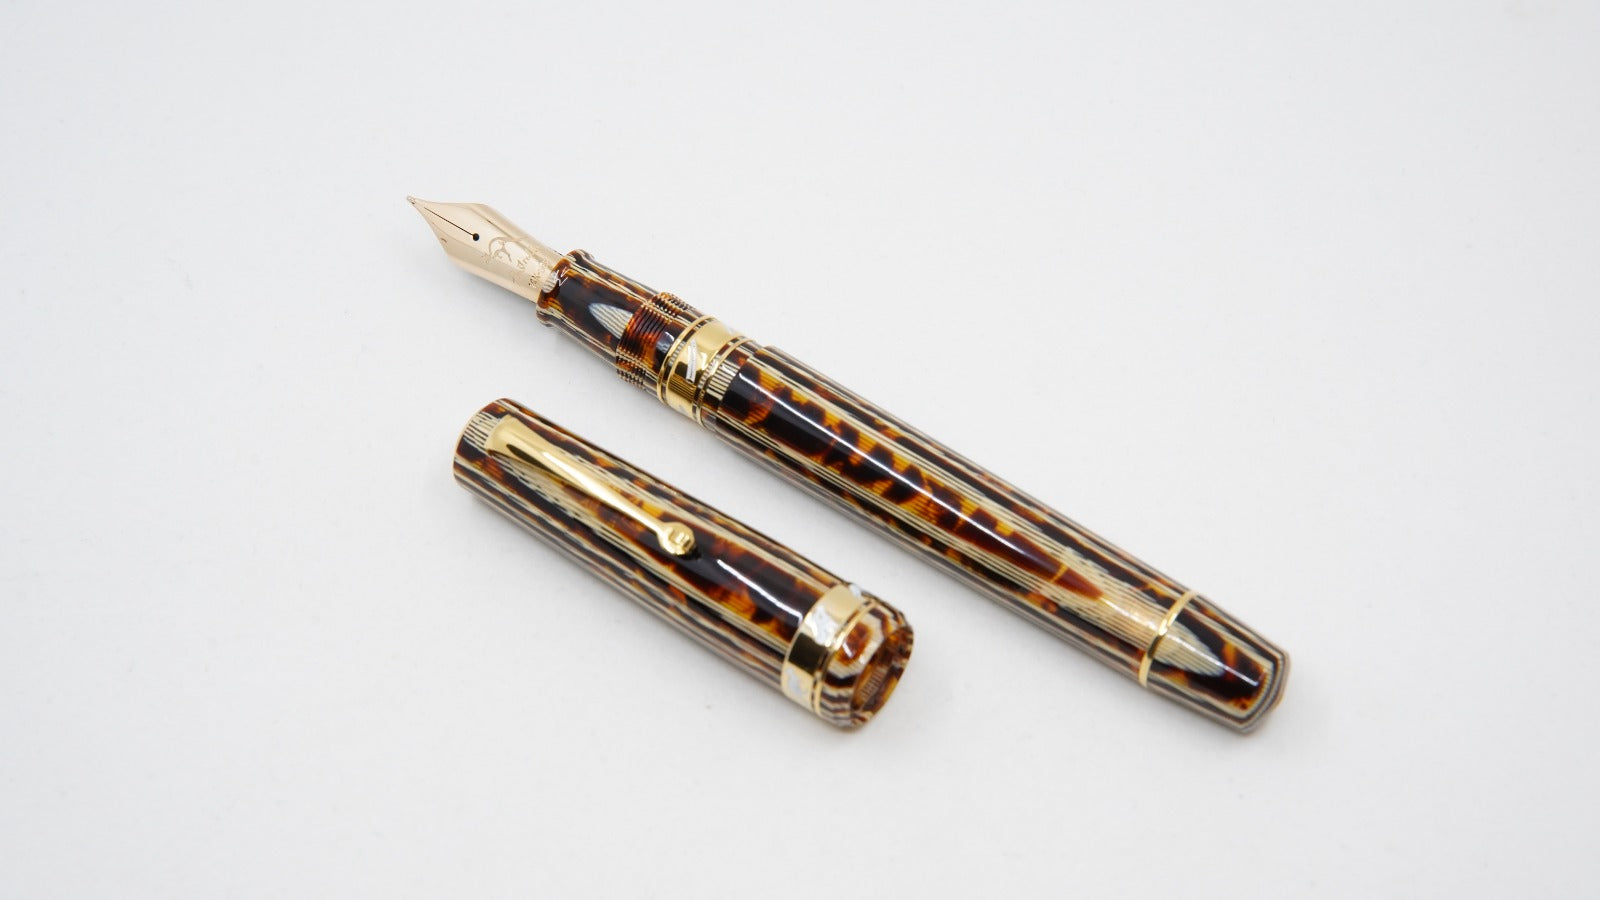 ASC Australia Series Bologna Extra - The Outback Limited Edition of 50 Pens